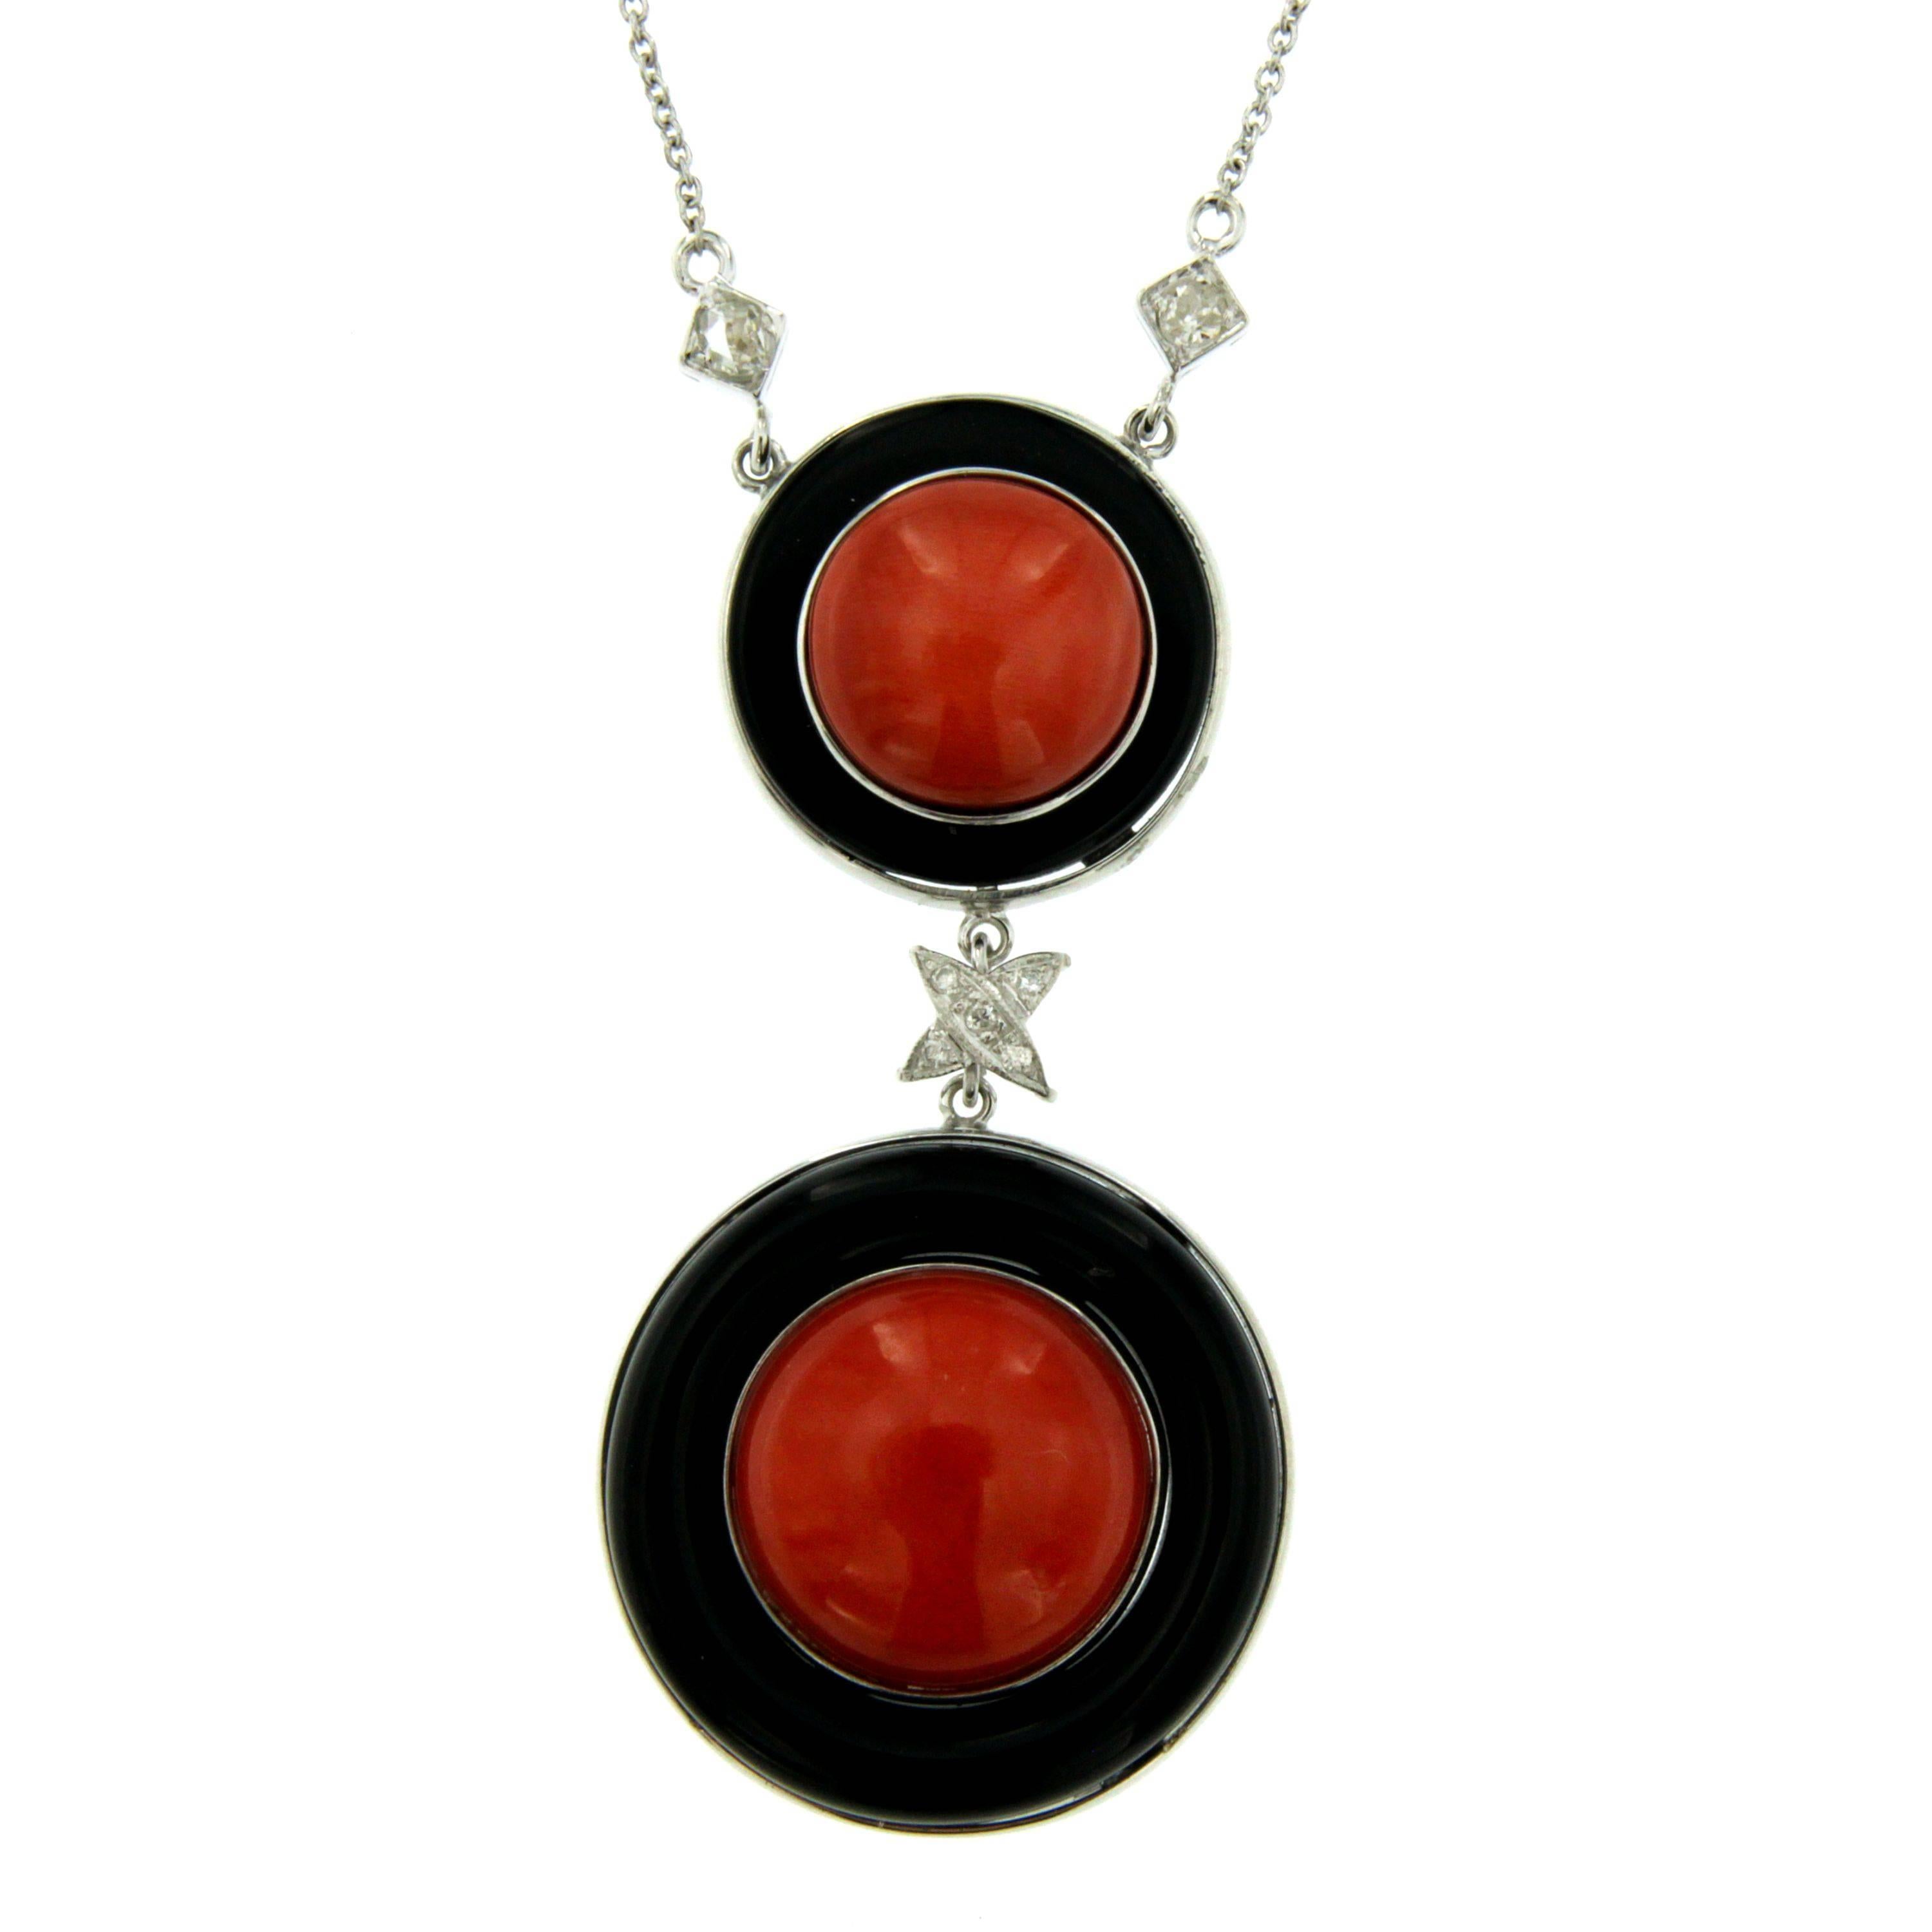 This stylish Sardinian Coral, Onyx and Diamond Vintage pendant is set in 18 karat gold.  The pendant is suspended by a 17 inches in lenght gold chain but can be shortened or lengthened as needed.
Total diamond weight: 0.25 carats
Circa